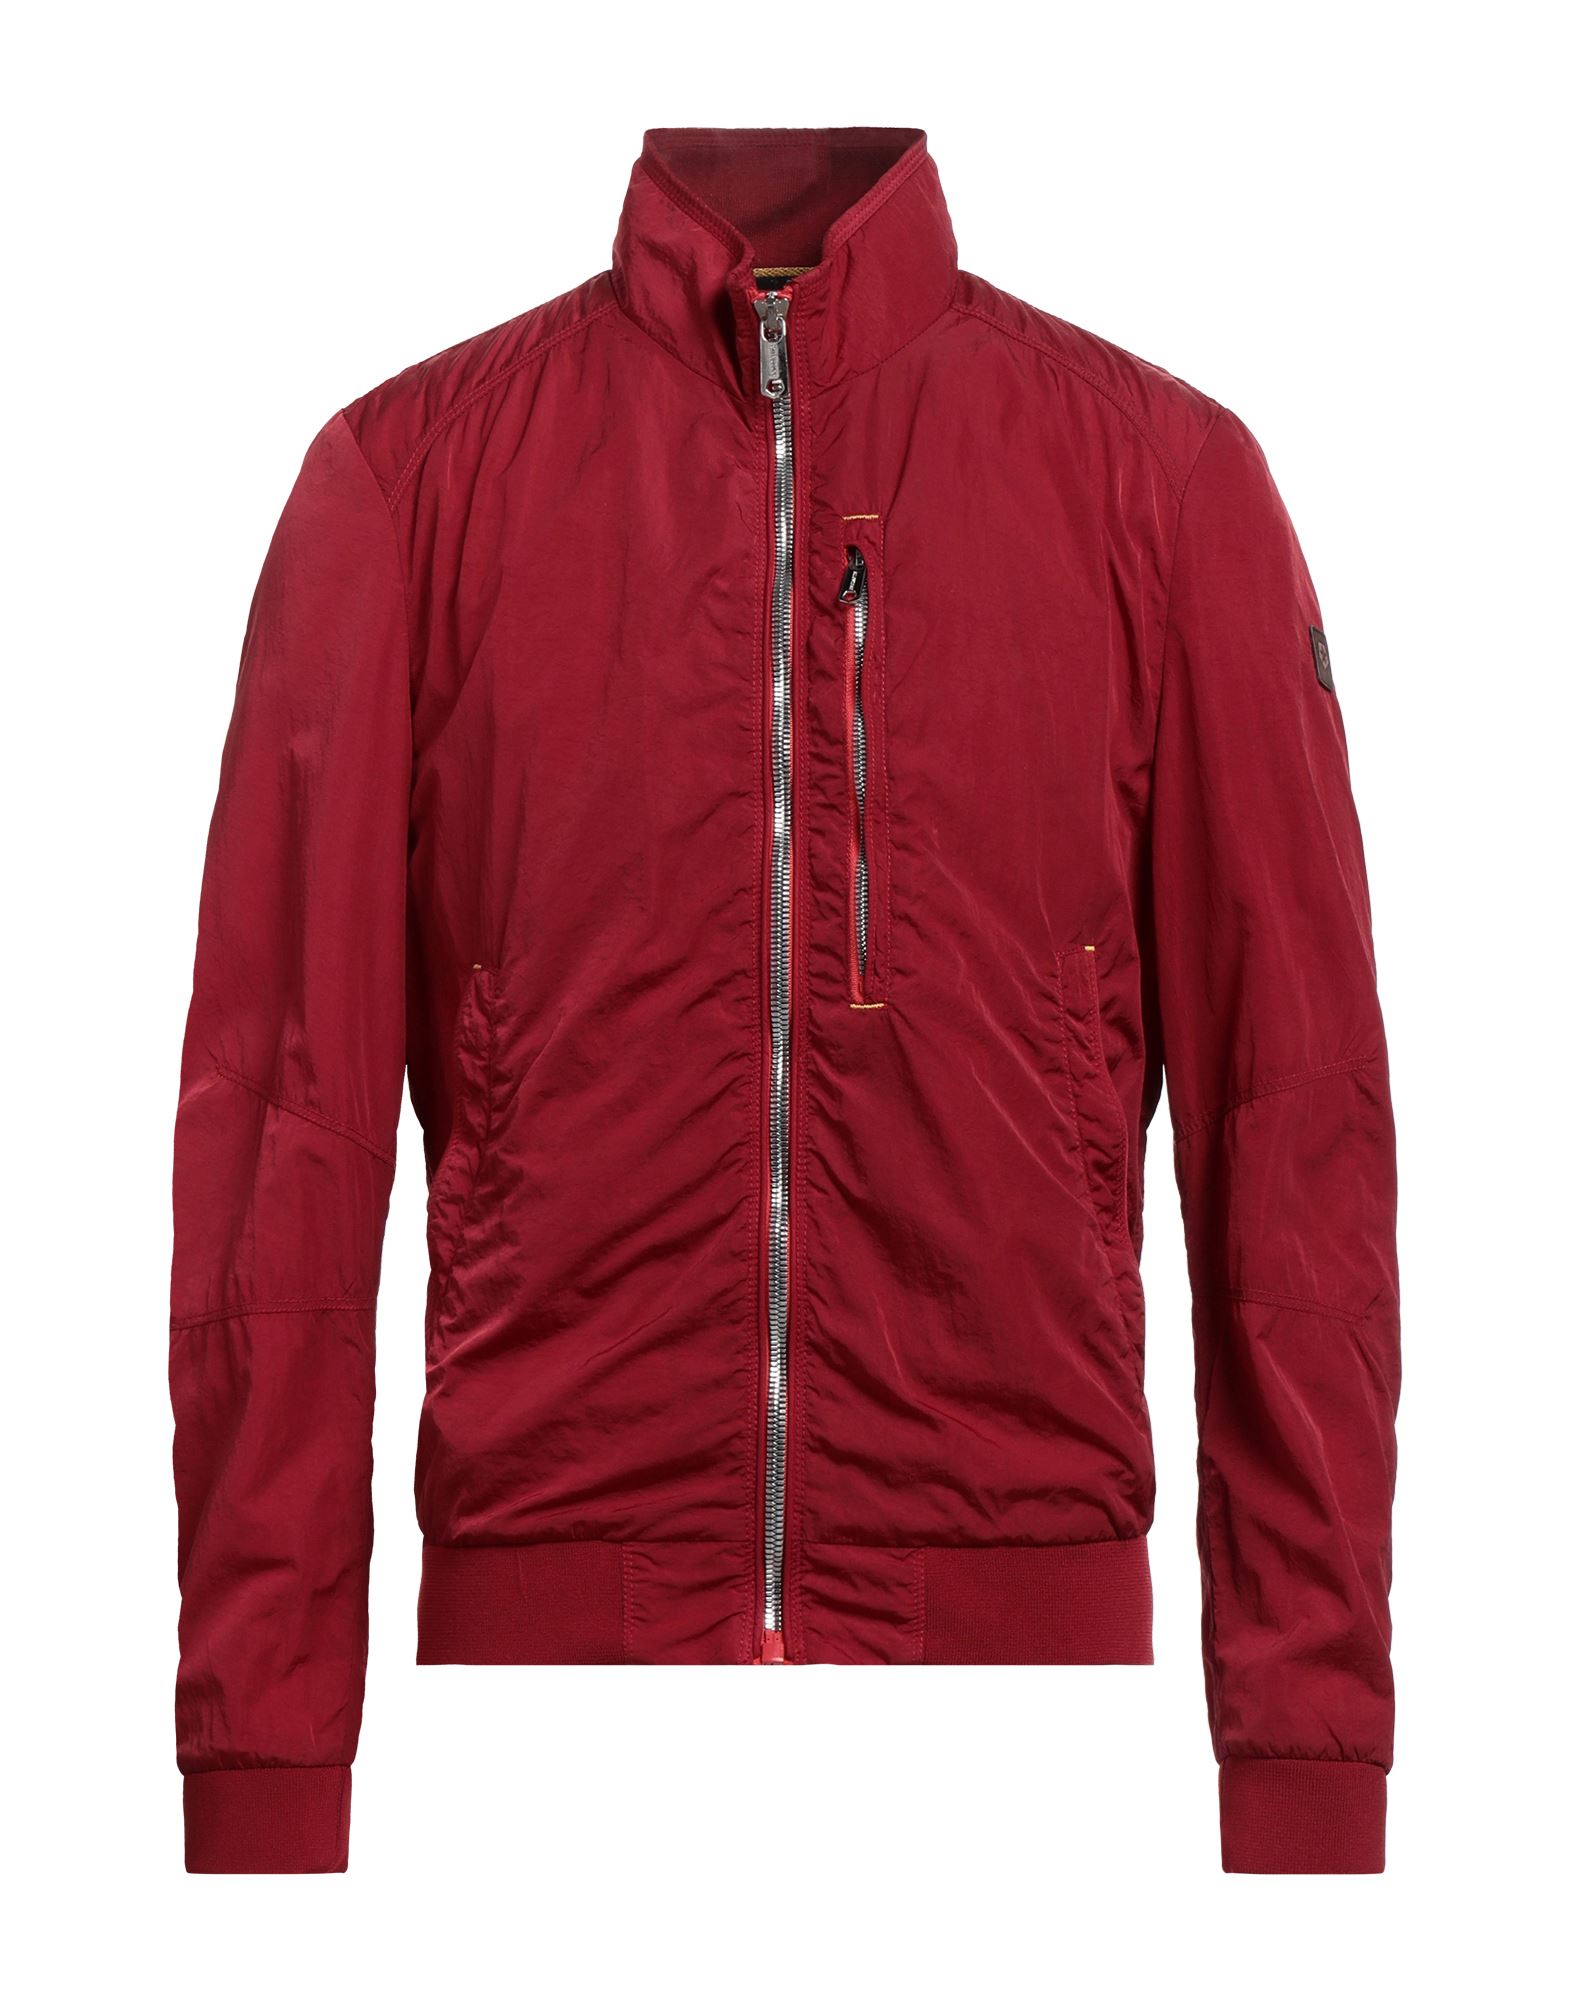 Milestone Jackets In Red